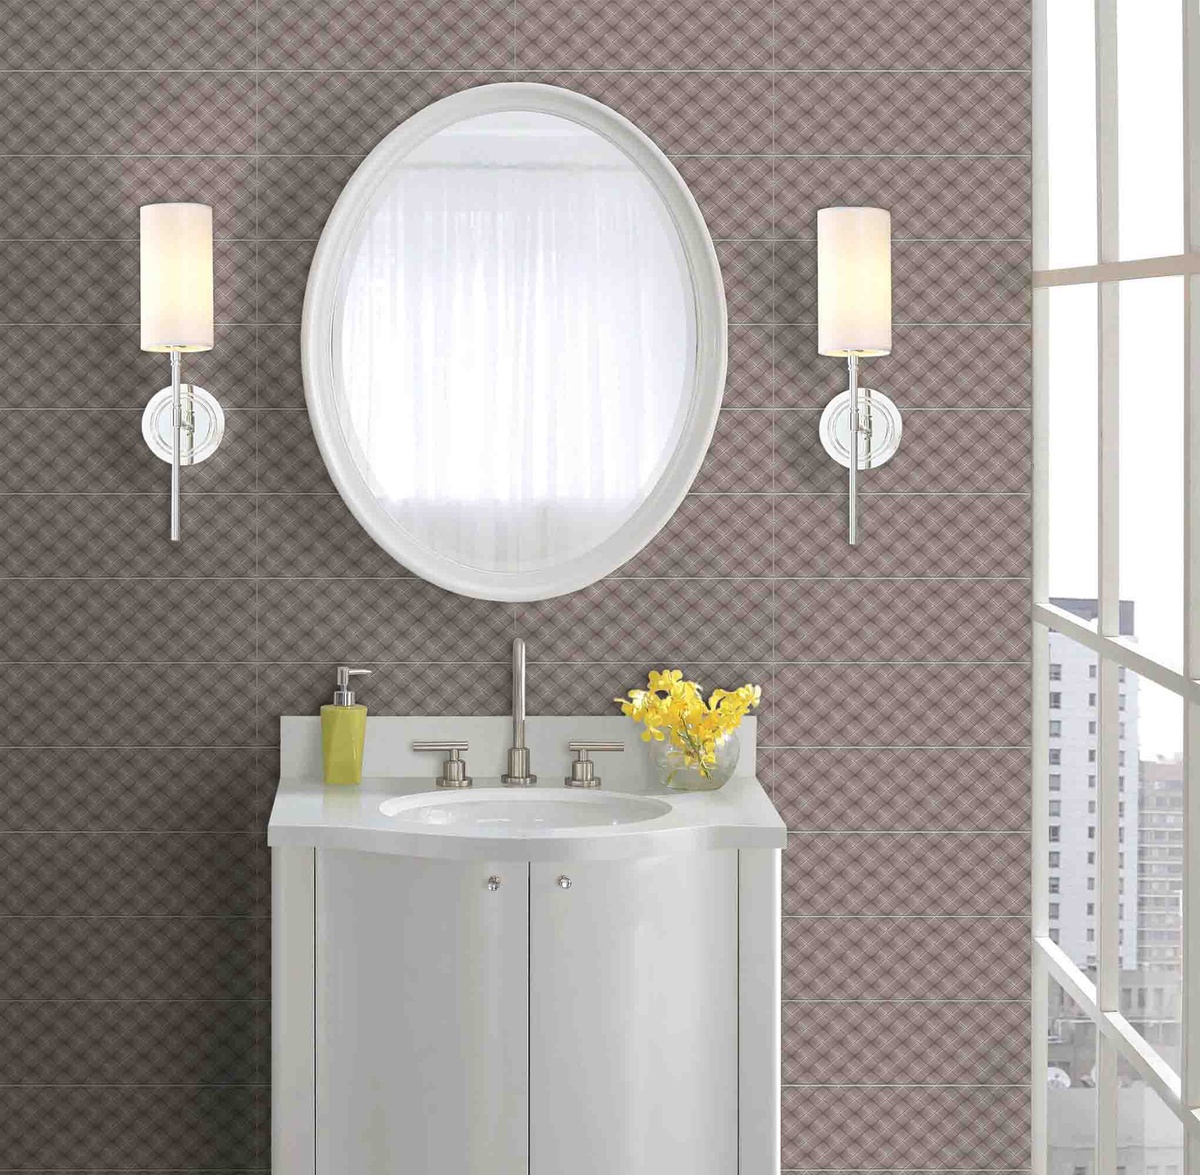 How To Use Patterned Floor Tiles In Bathroom  For An Aesthetic View ?